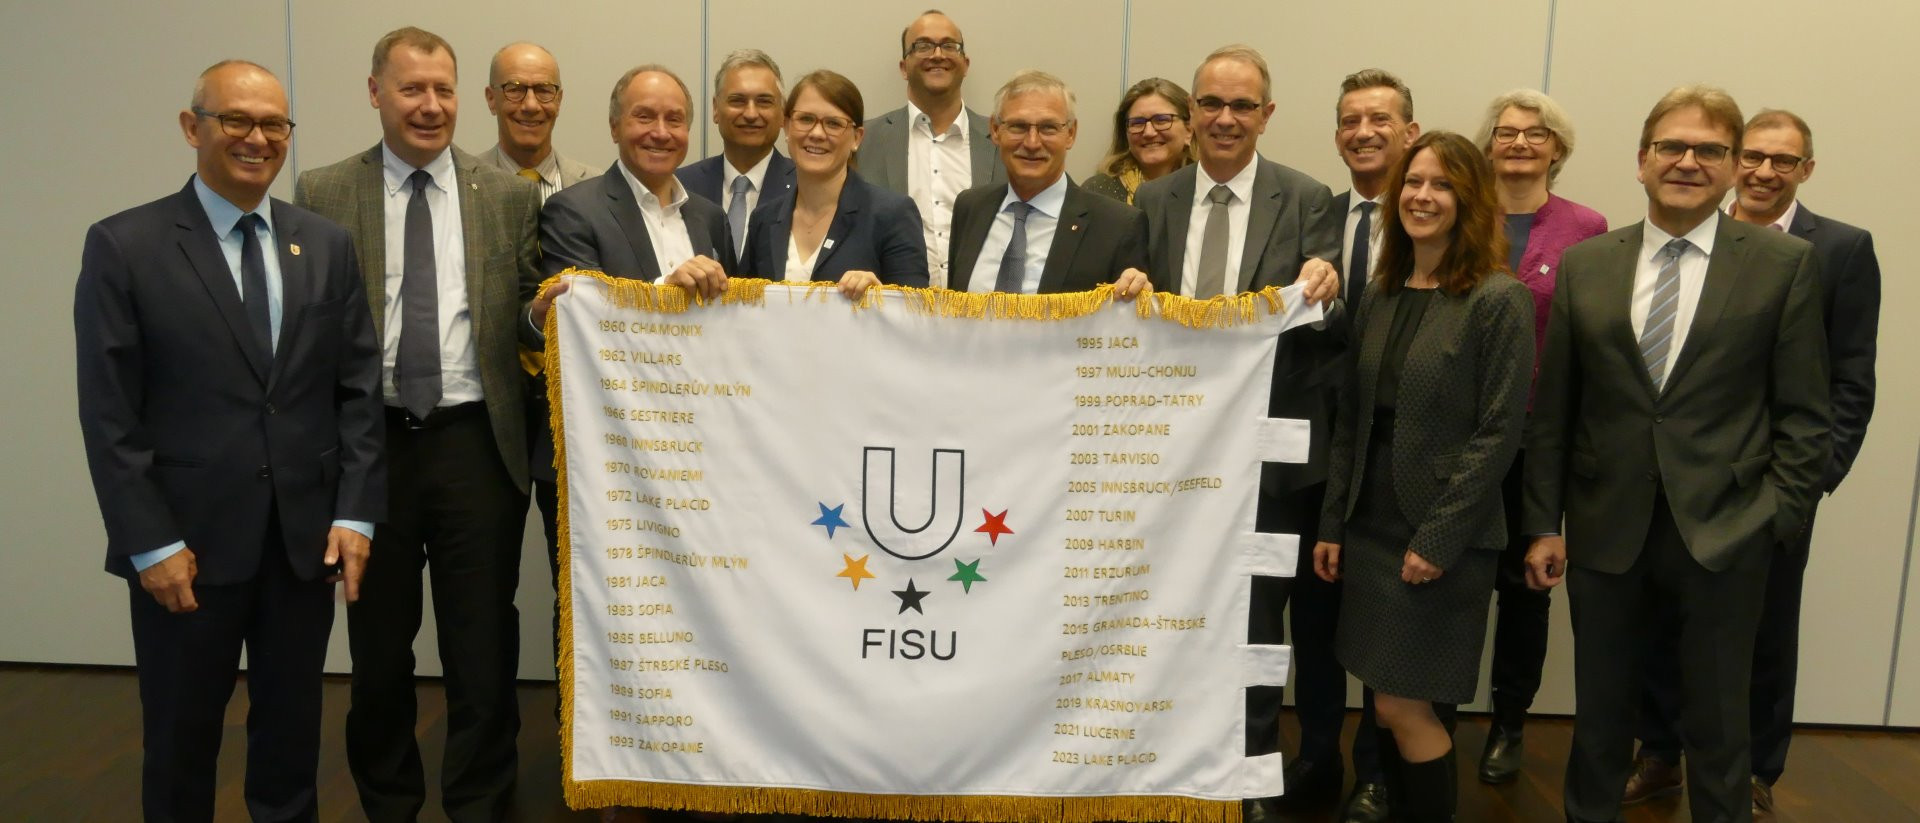 The International University Sports Federation flag has been handed over to Lucerne 2021 ©Lucerne 2021